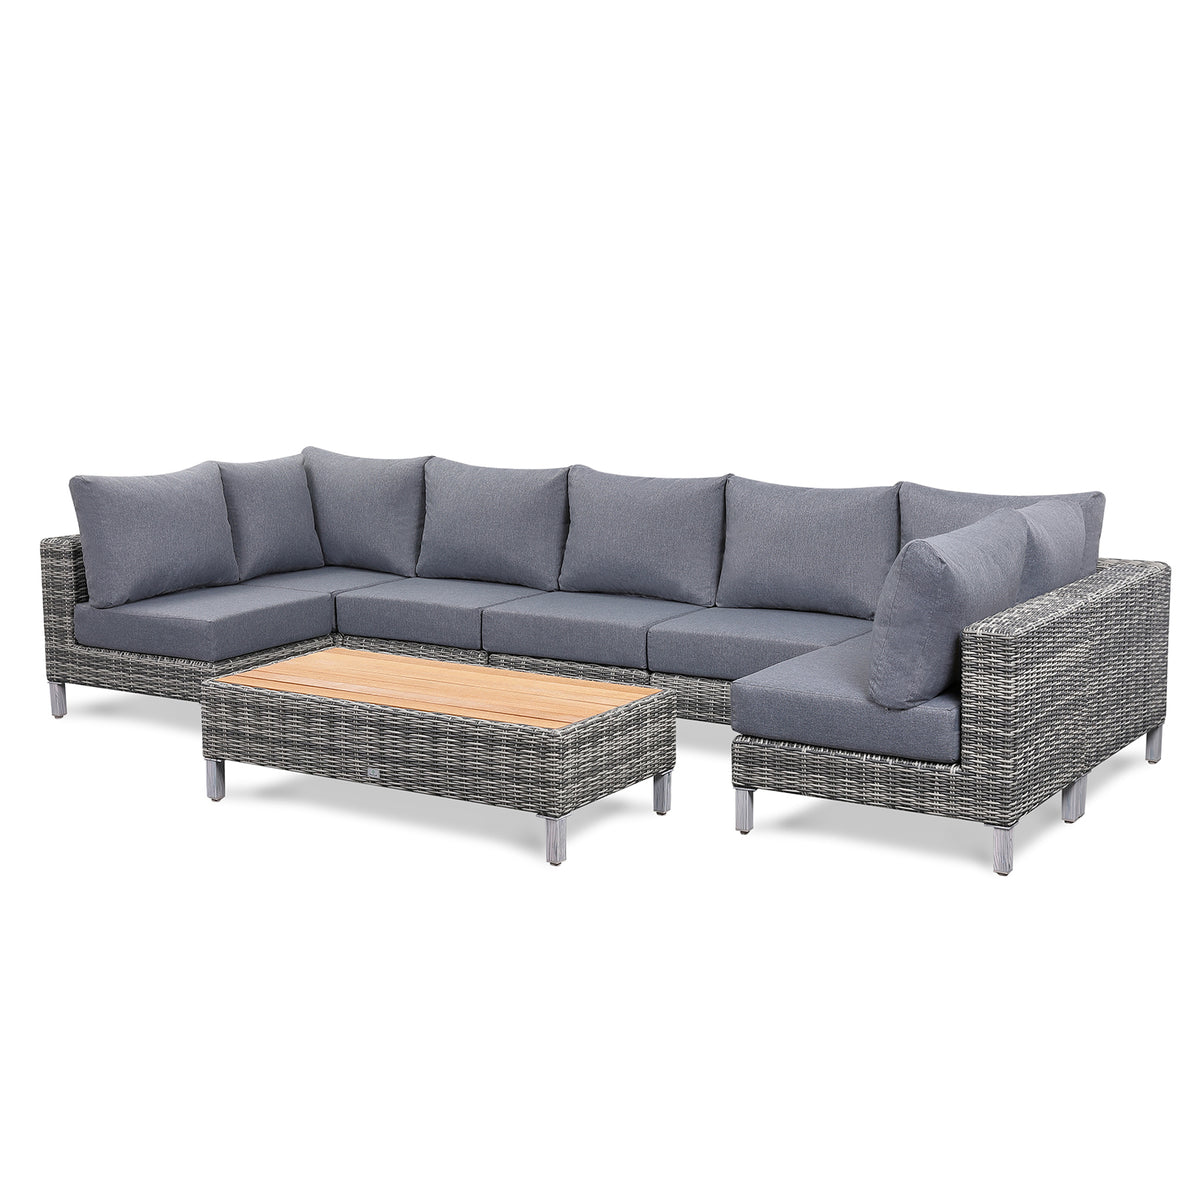 Grey Wicker Outdoor Sofa with big Table - 7 Seat